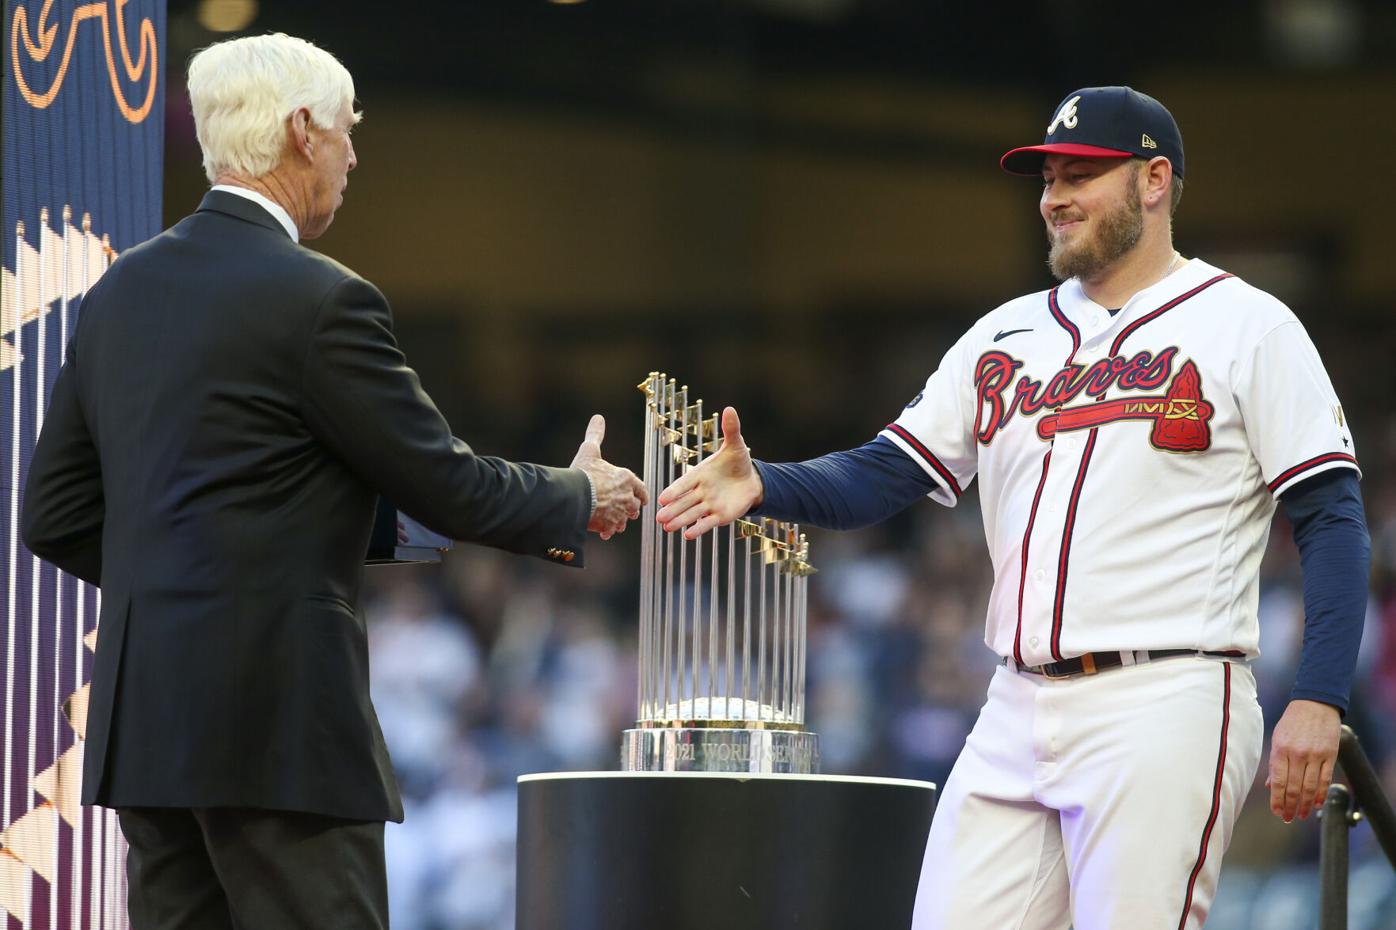 On the Braves' intangibles and surging lefties Tyler Matzek and